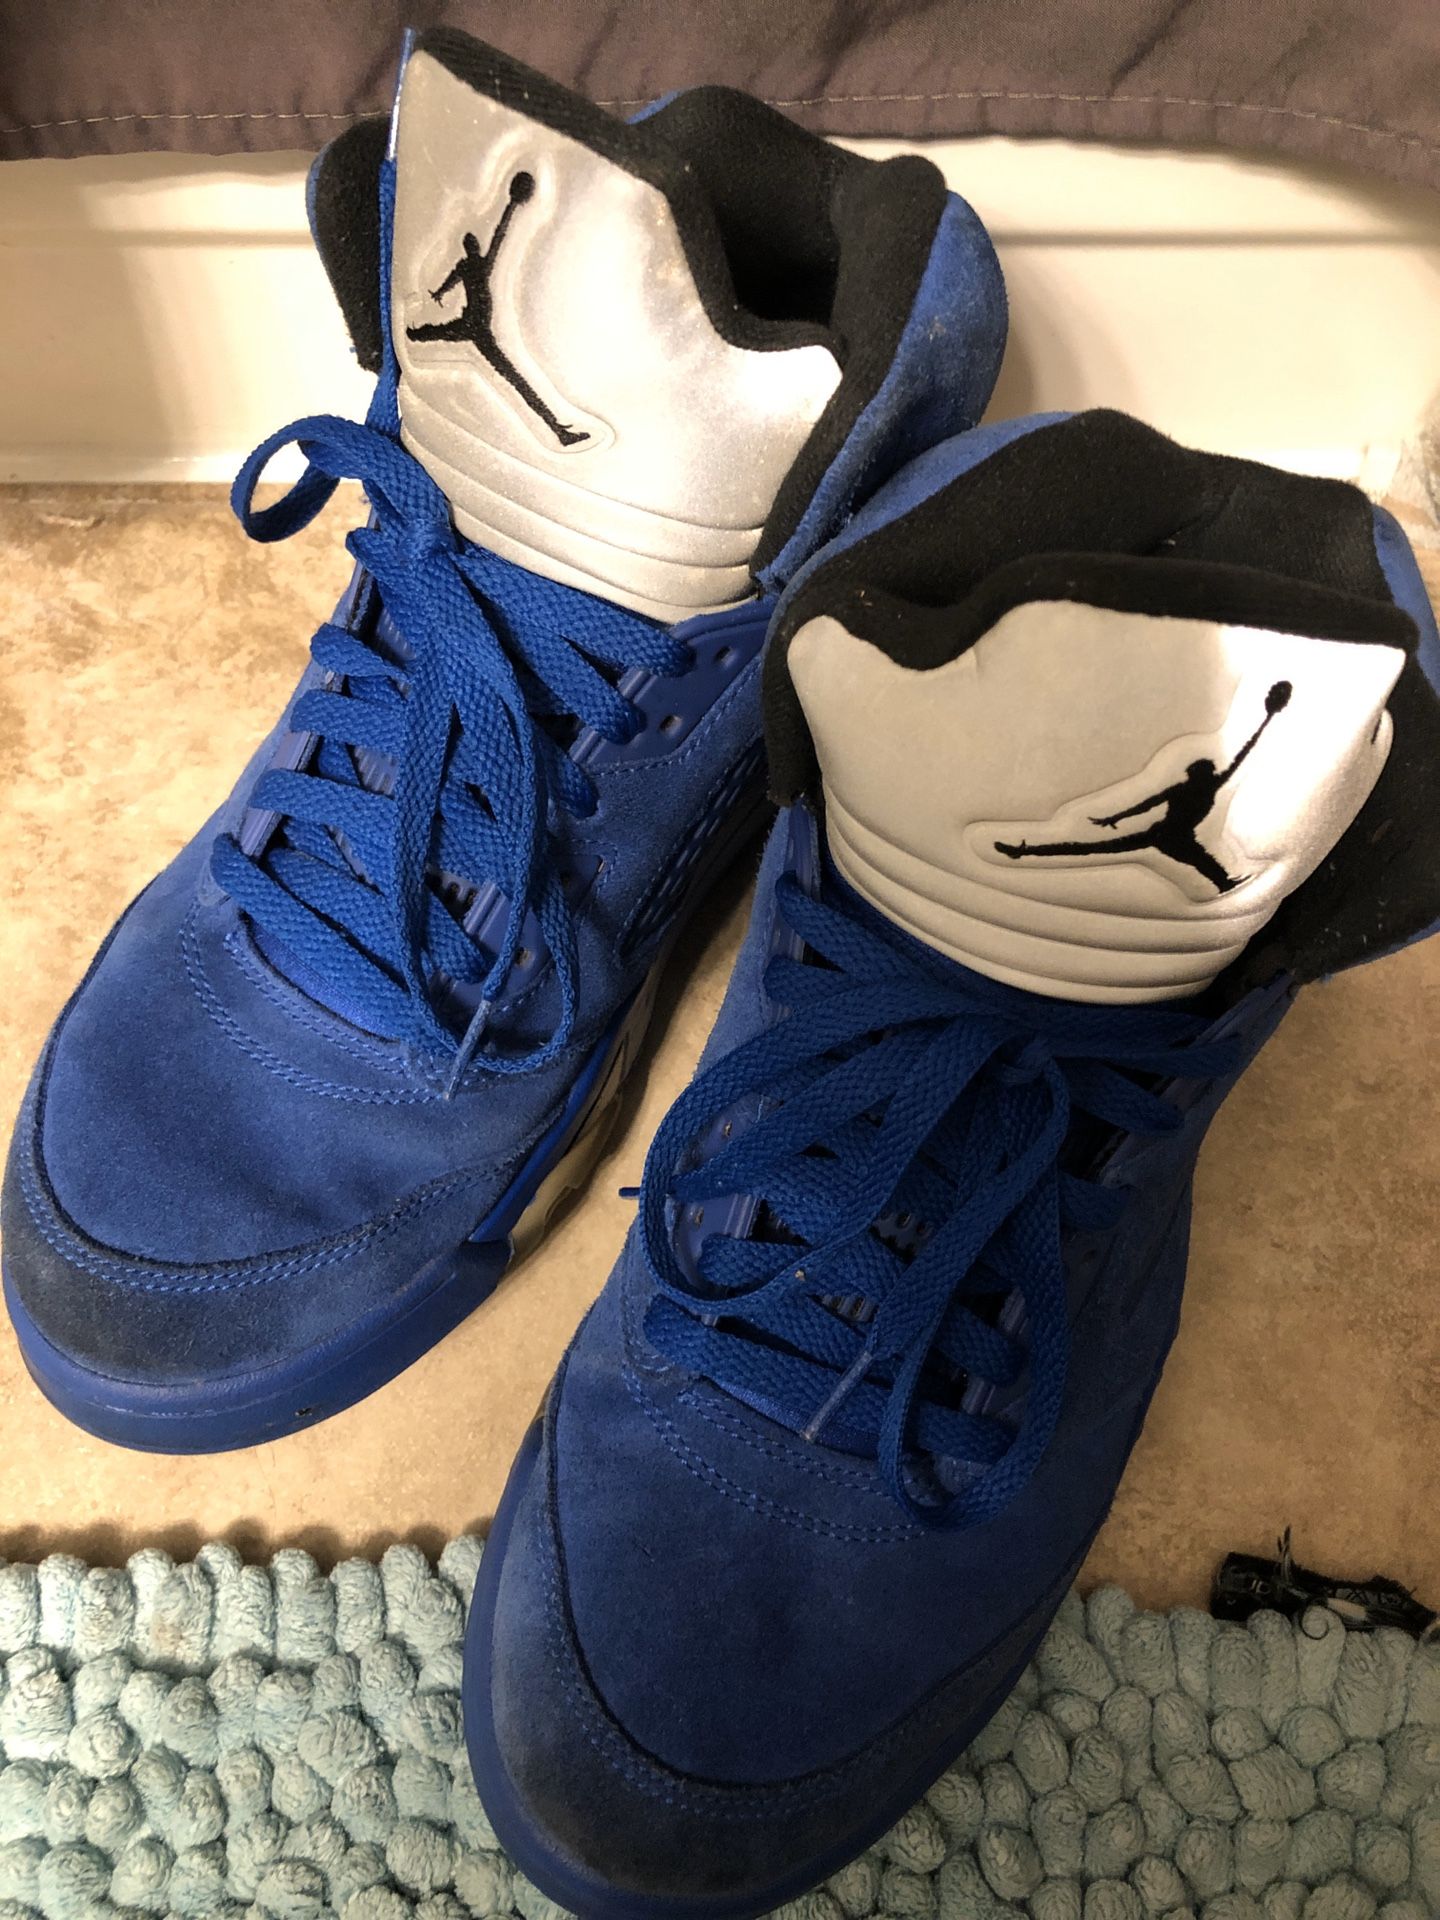 Jordan 5 needs work can’t drive so would have to meet up some where close by accepts cashapp or cash